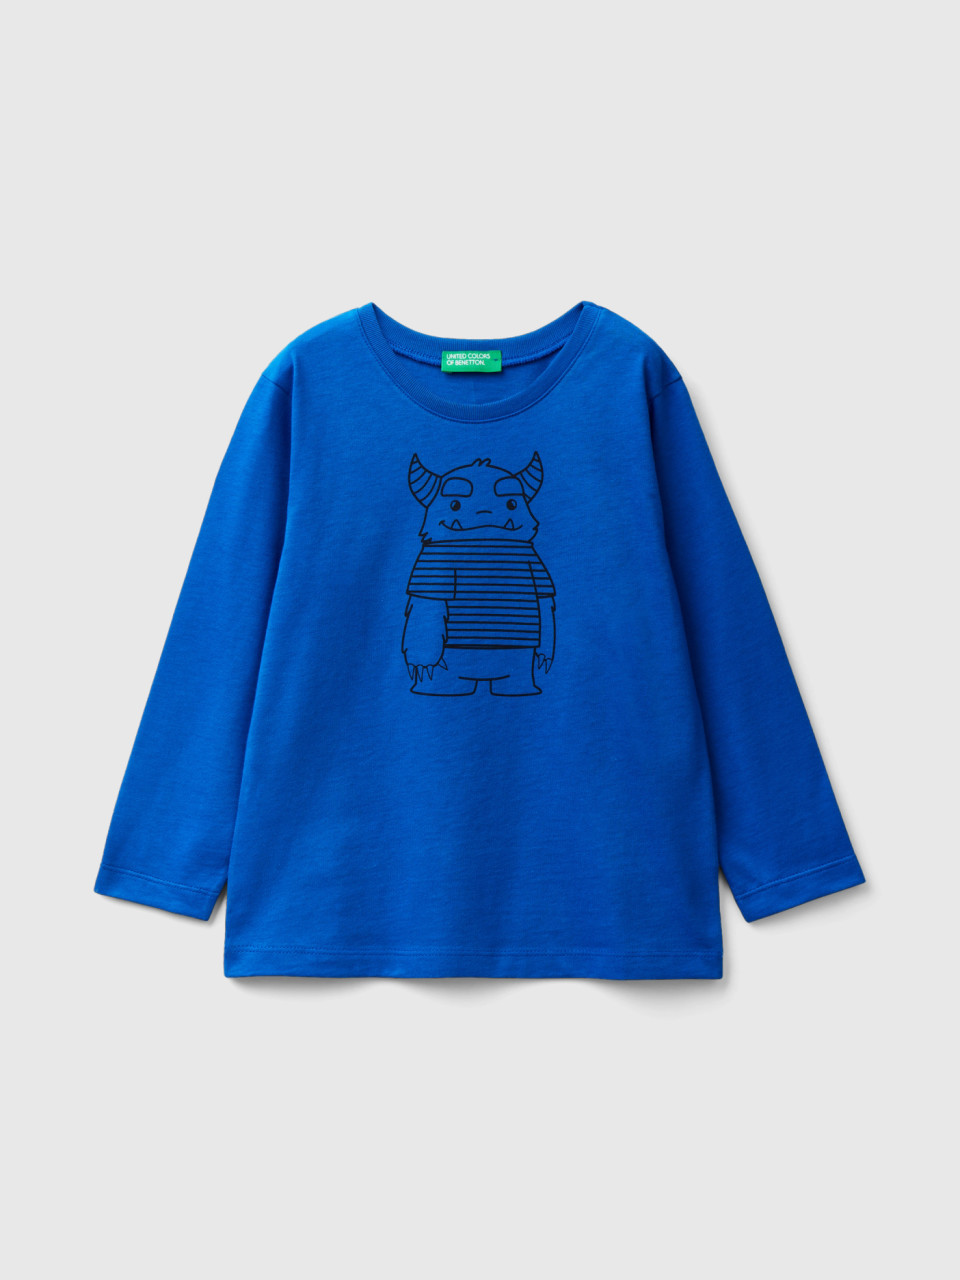 Benetton, Sweater In Cotton With Print, Bright Blue, Kids